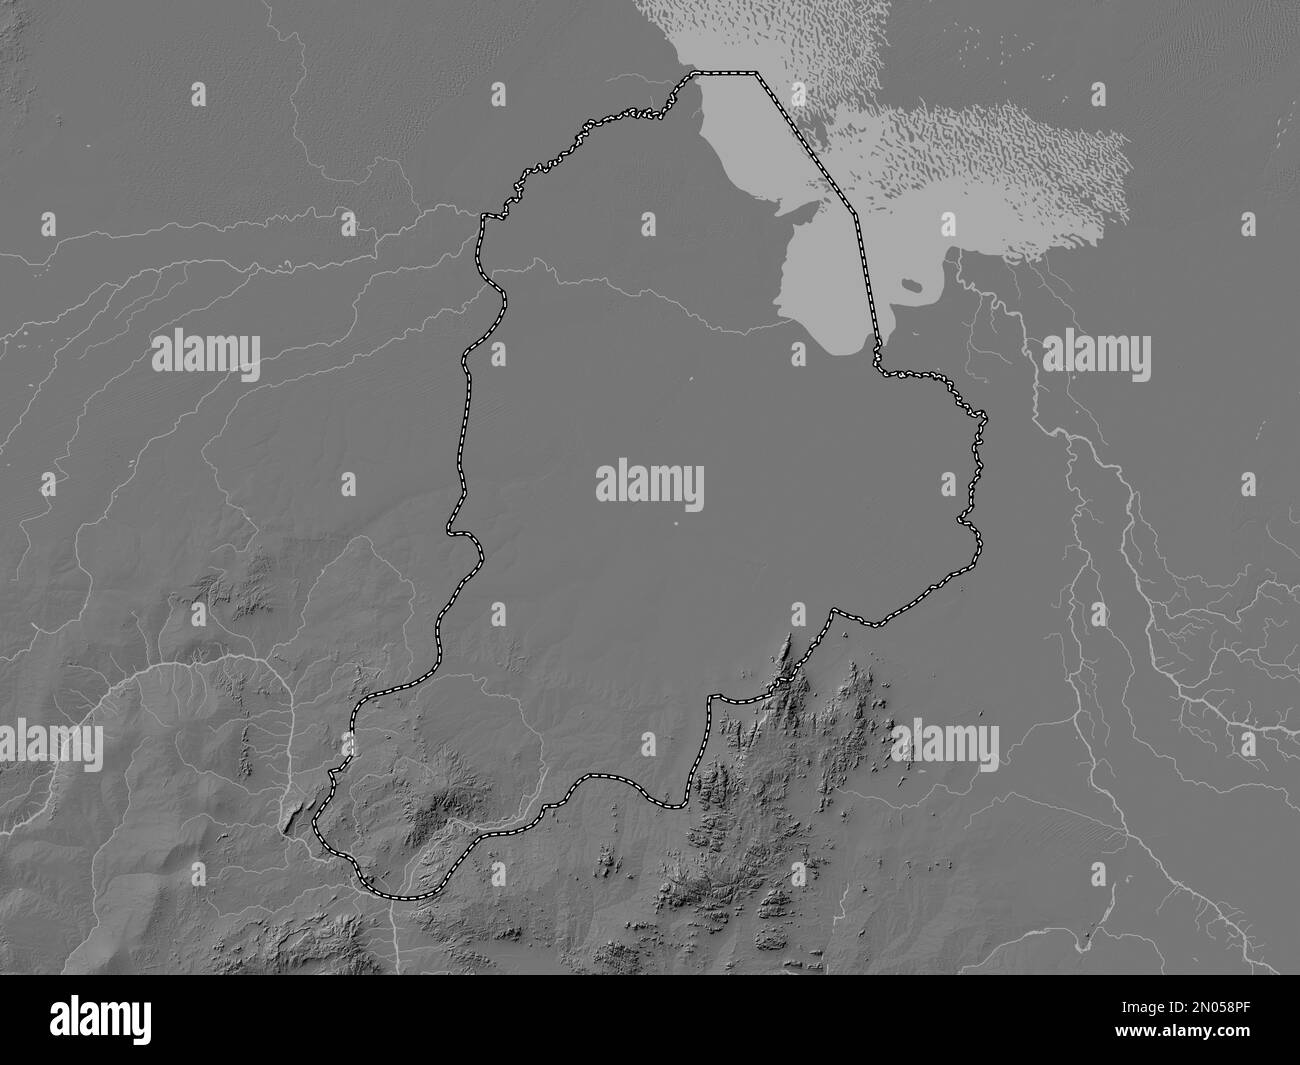 Borno, state of Nigeria. Bilevel elevation map with lakes and rivers Stock Photo